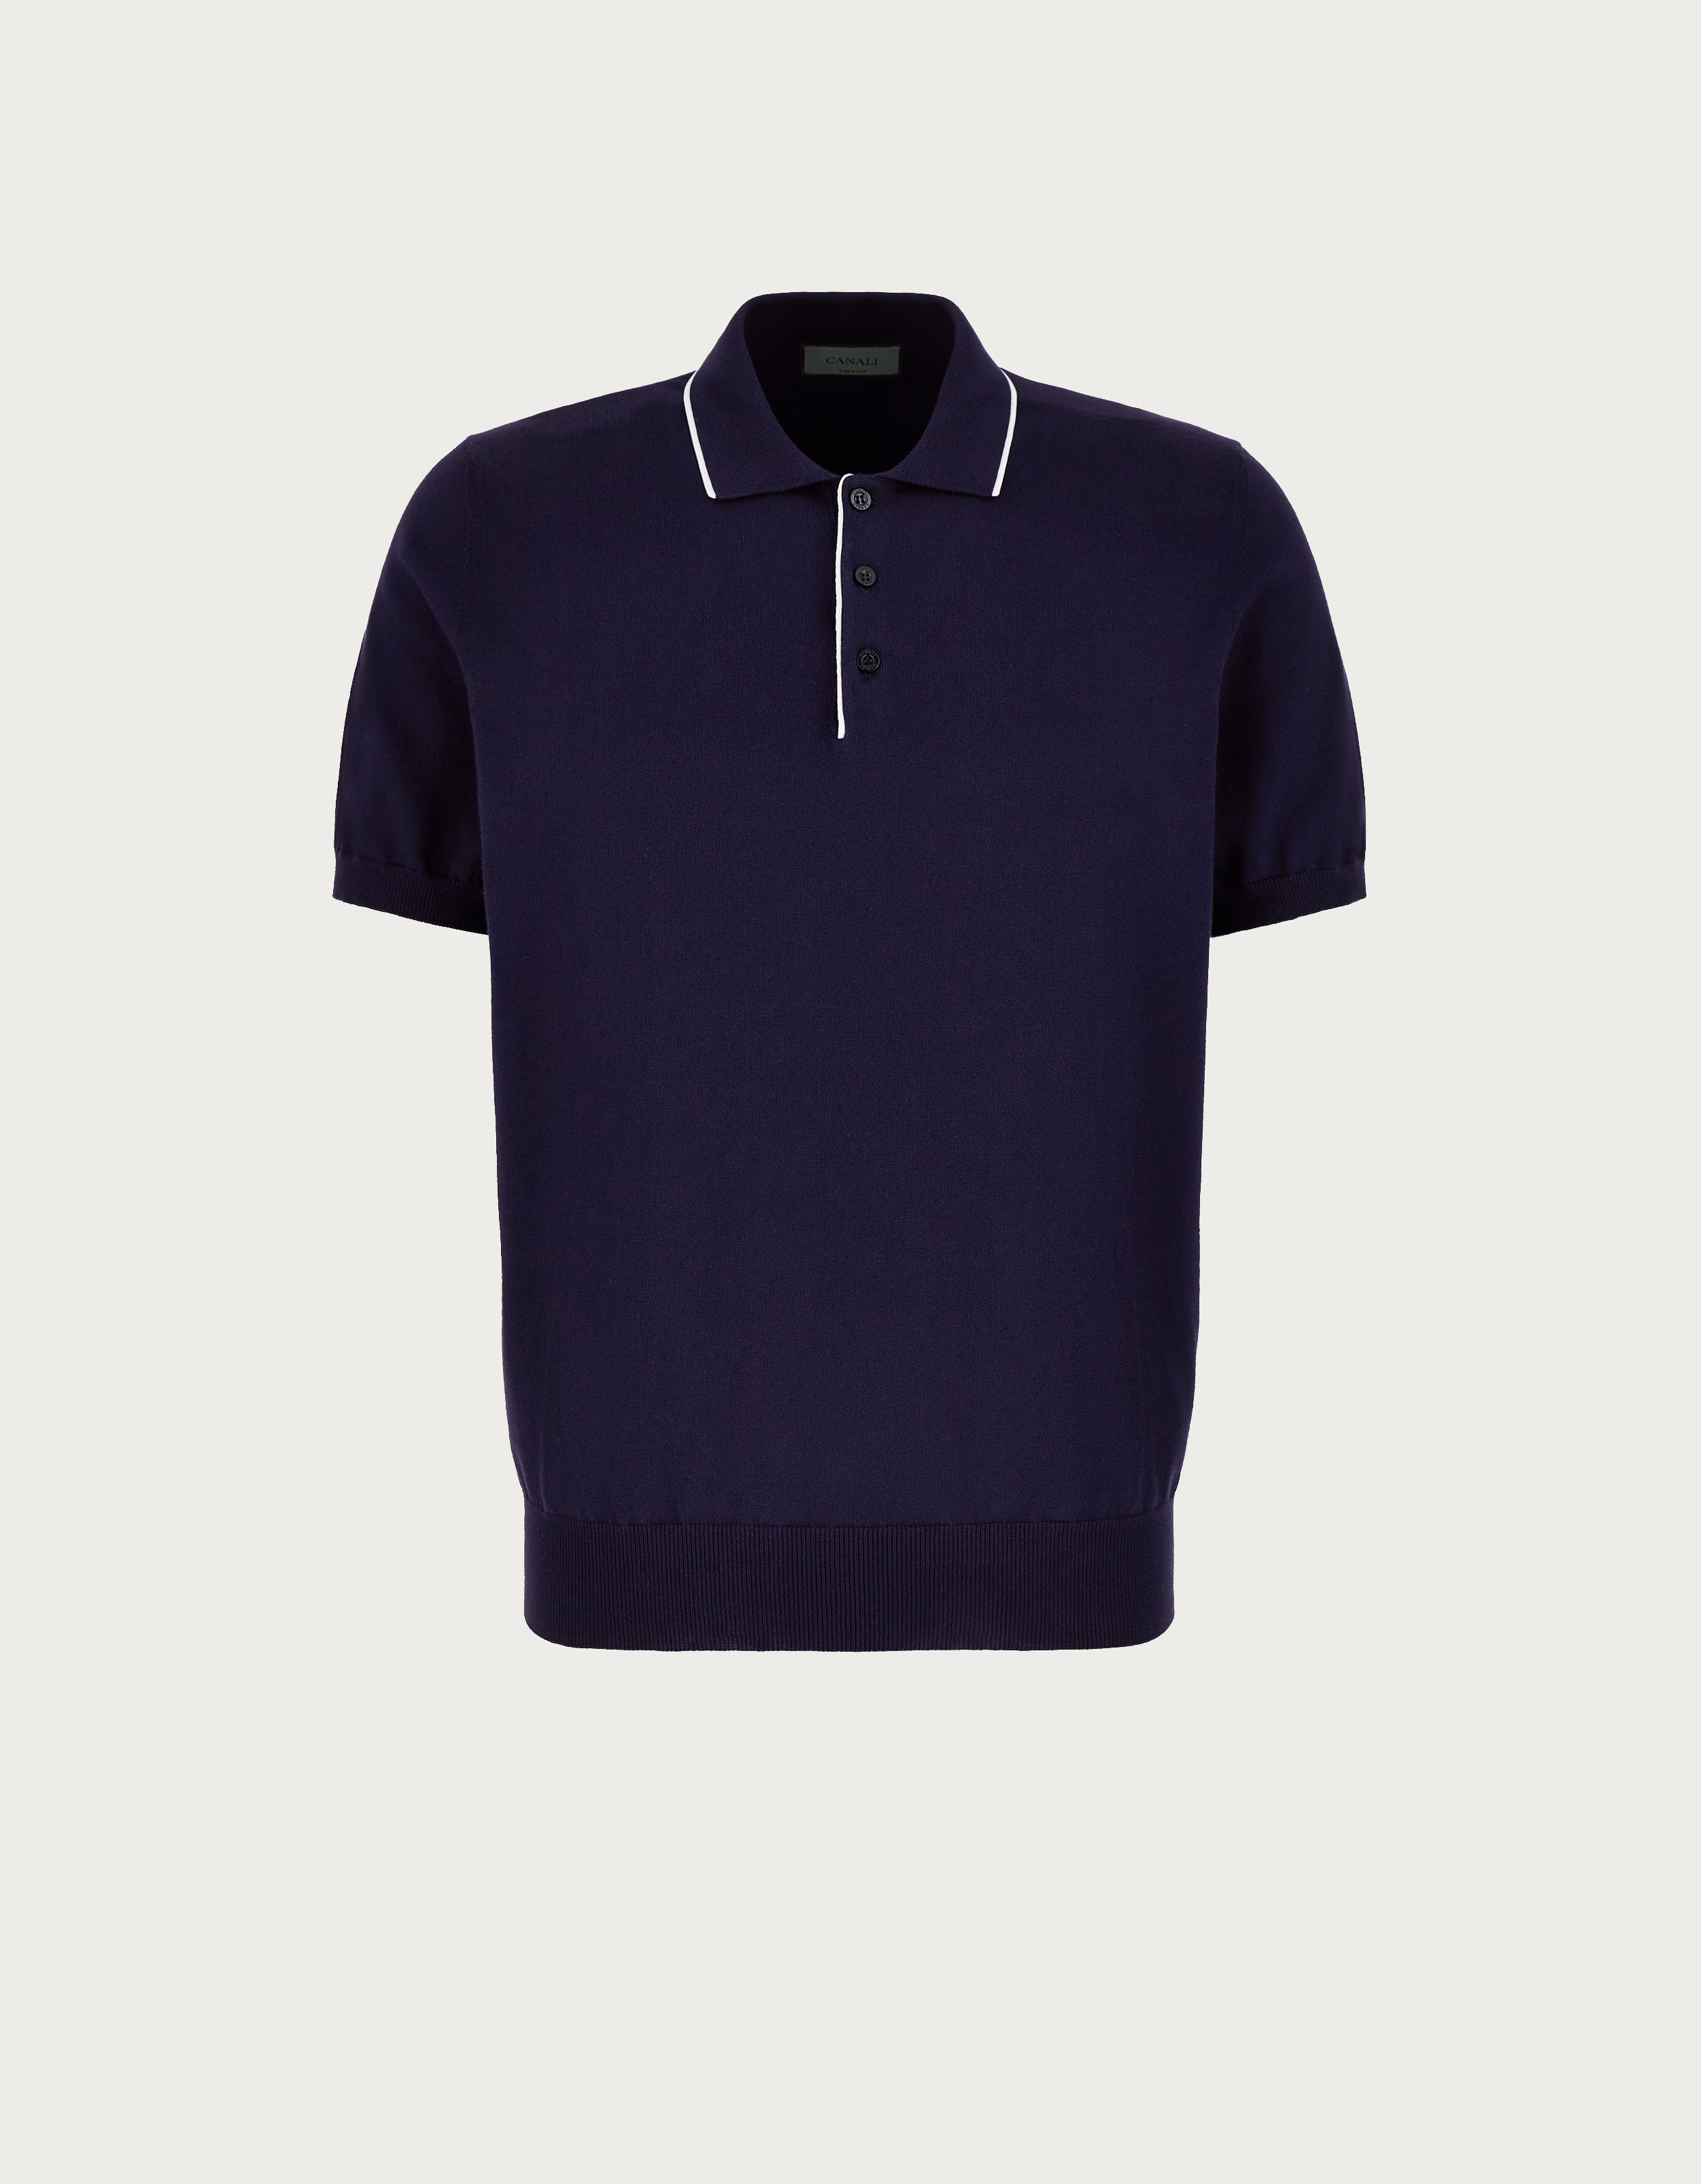 Navy blue and white polo shirt in garment-dyed cotton - Canali US